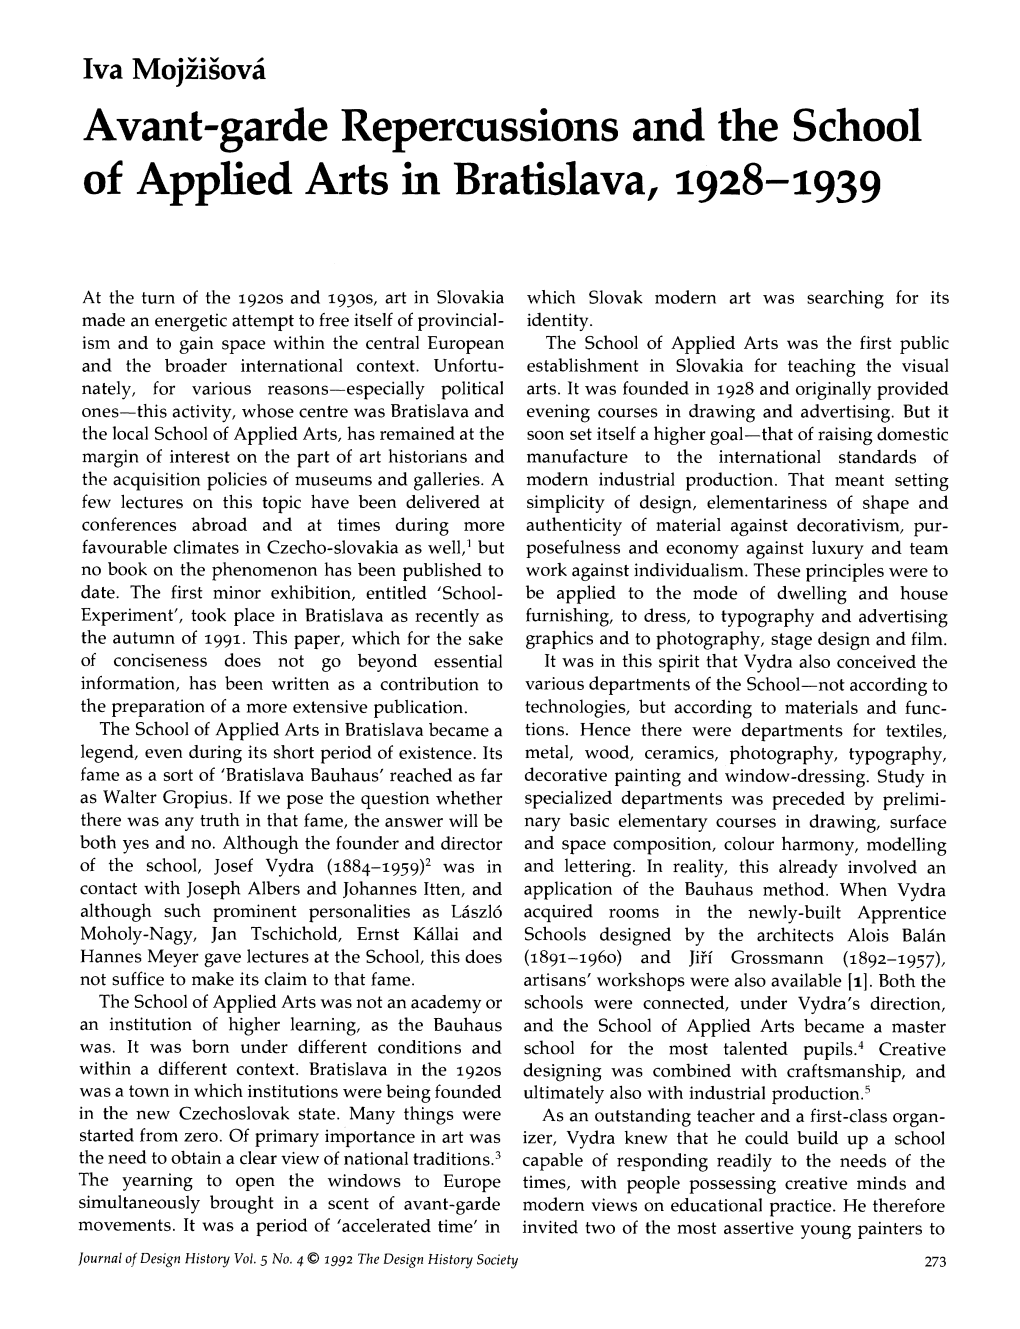 Avant-Garde Repercussions and the School of Applied Arts in Bratislava